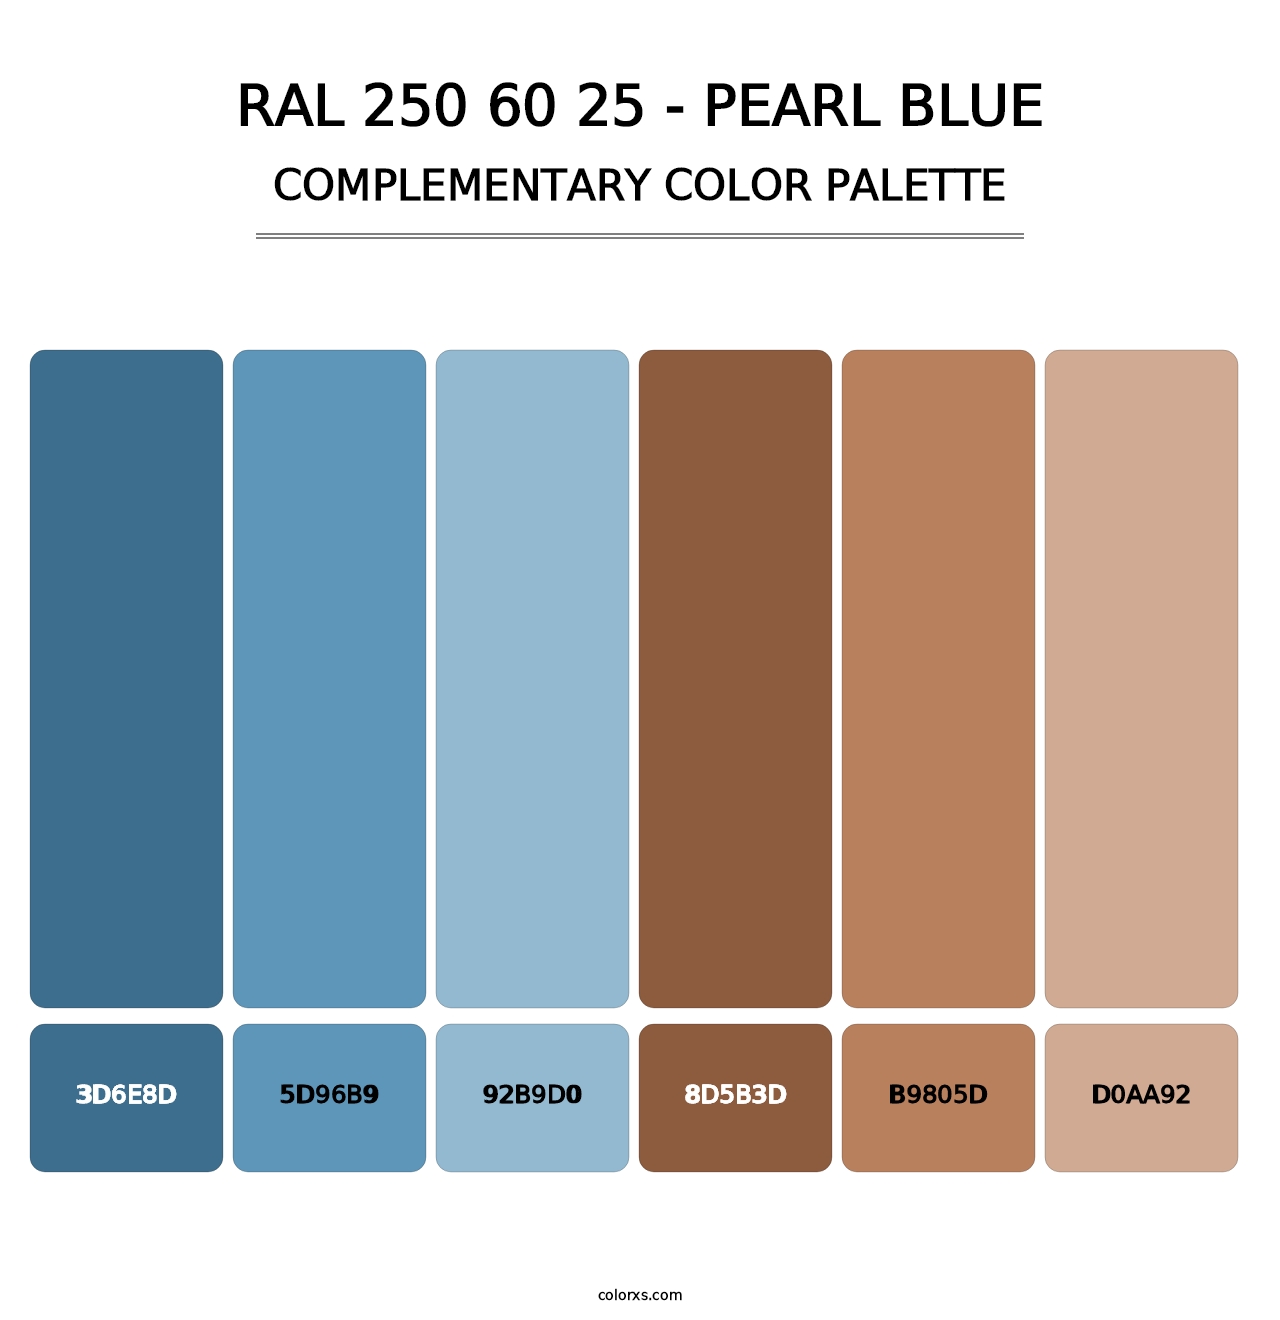 RAL 250 60 25 - Pearl Blue - Complementary Color Palette